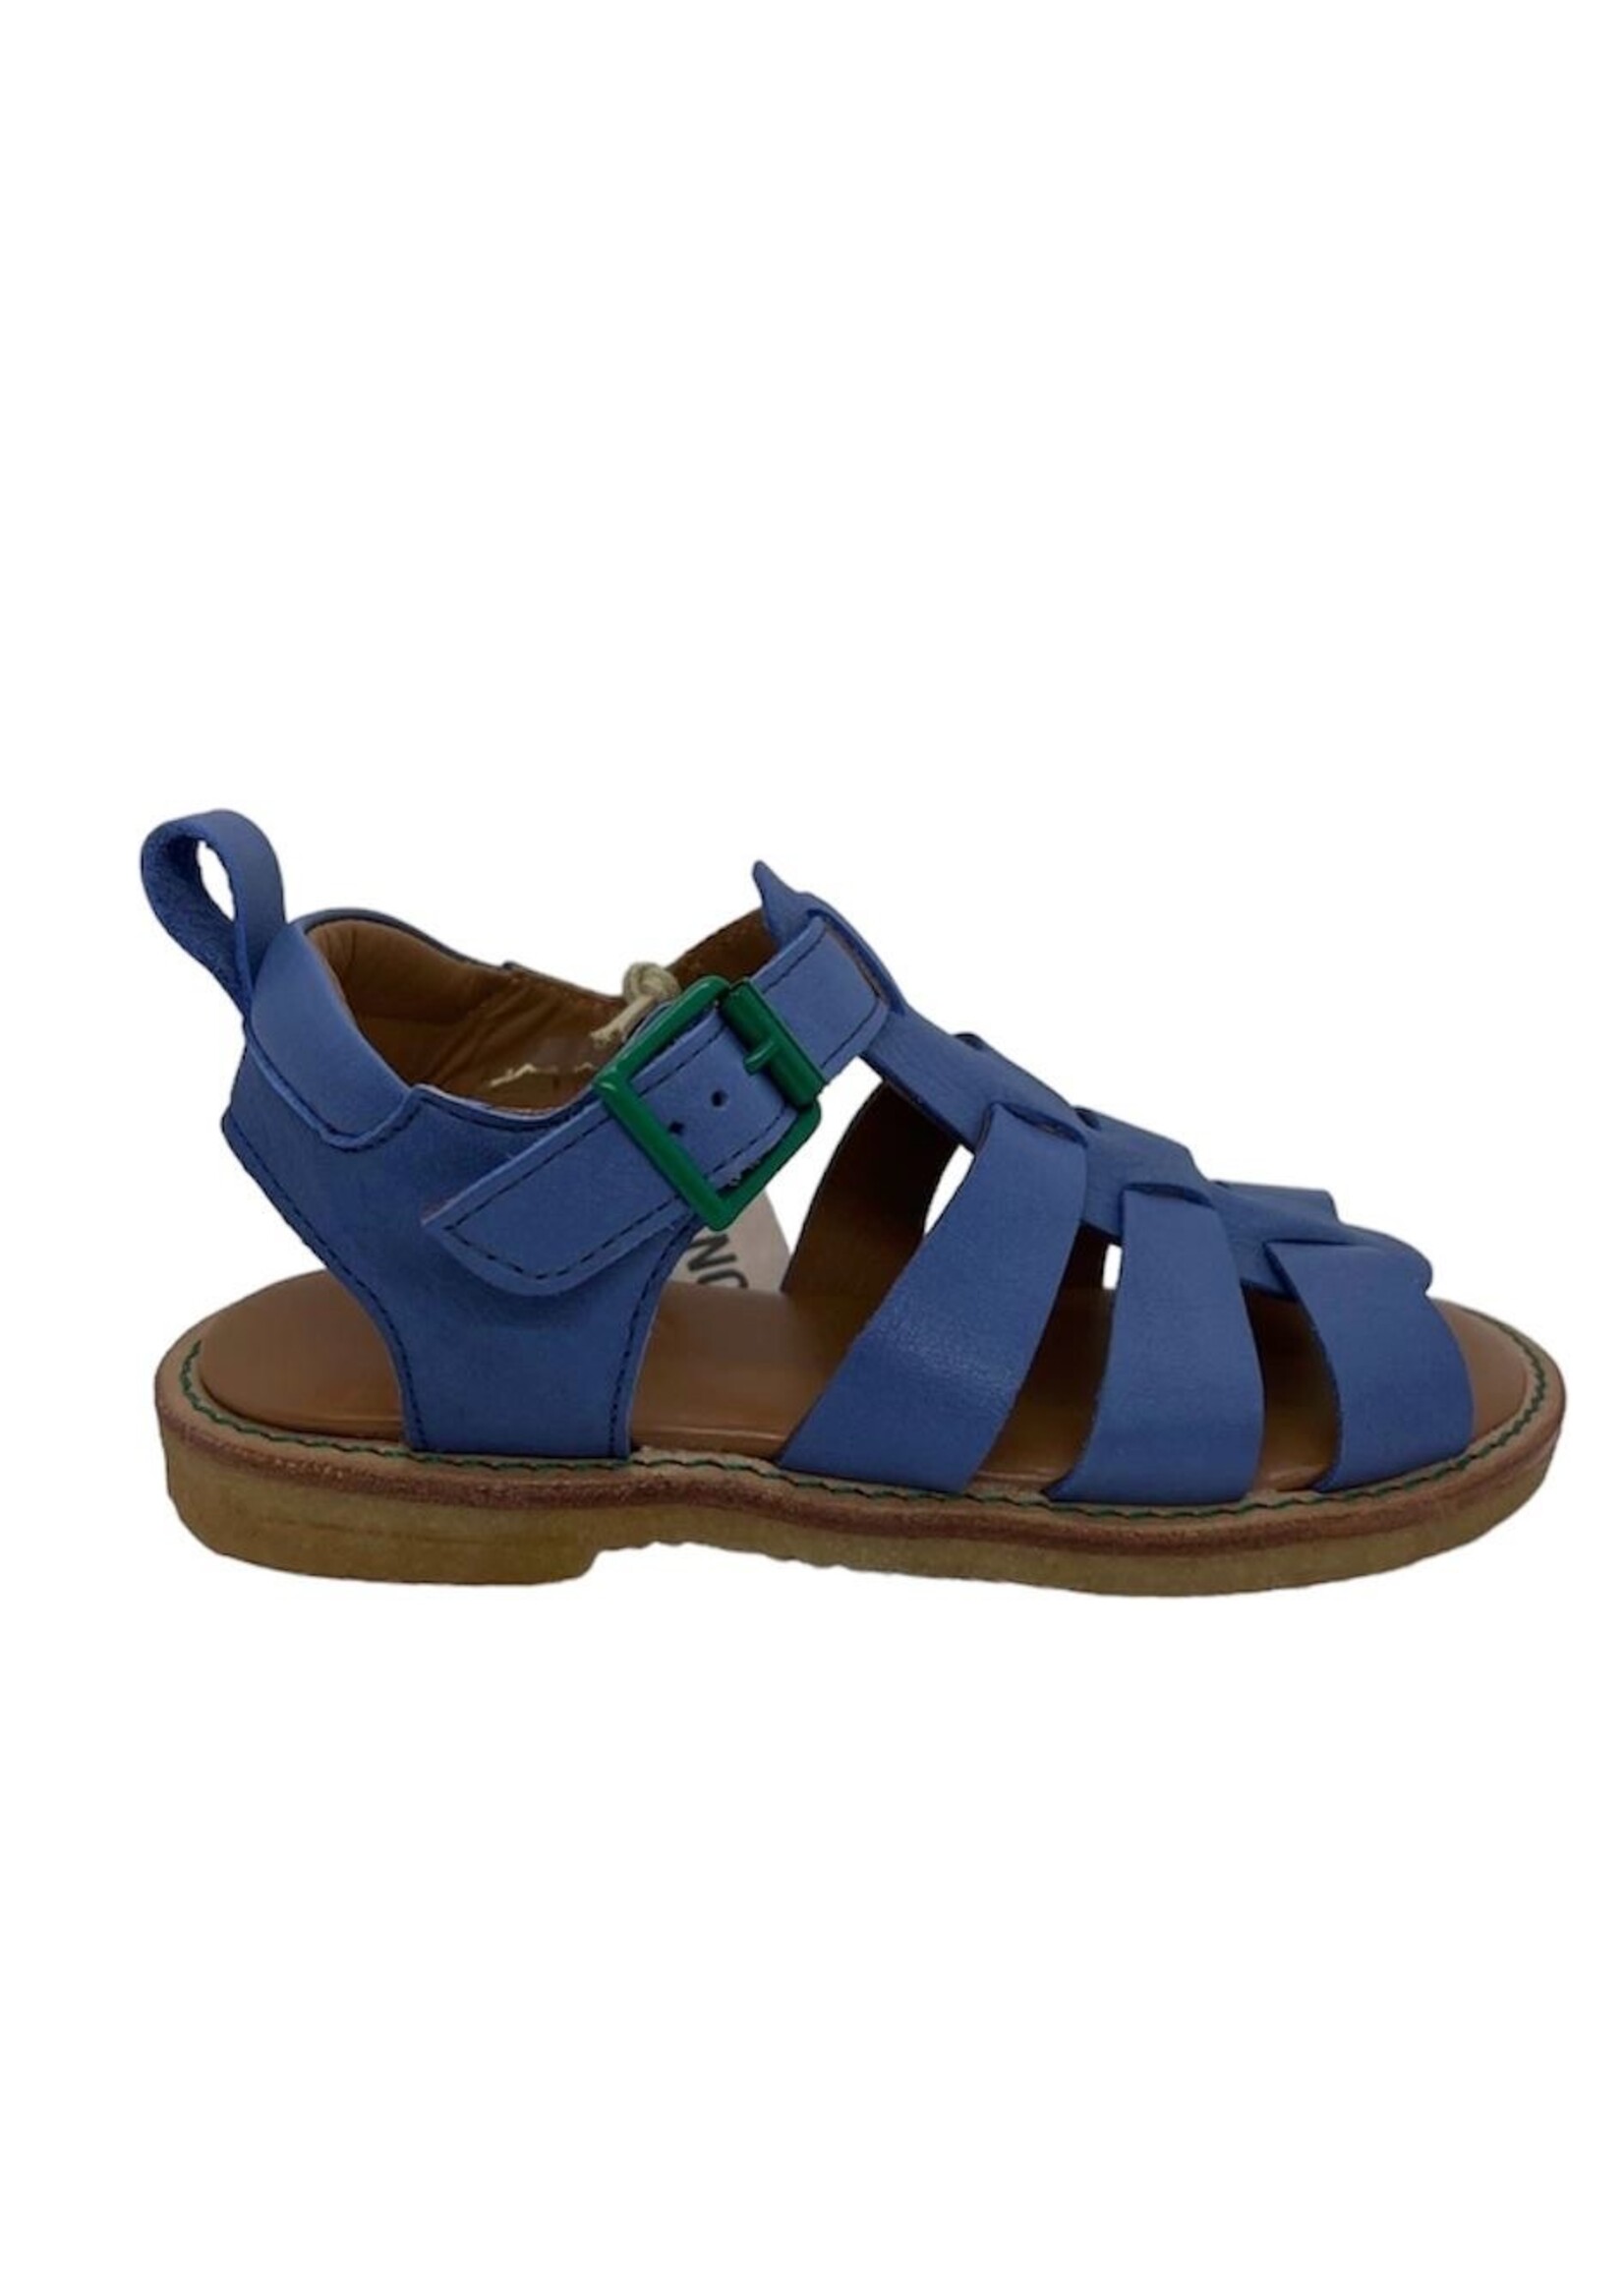 Angulus 0648-101 sandal with buckle and contrast details